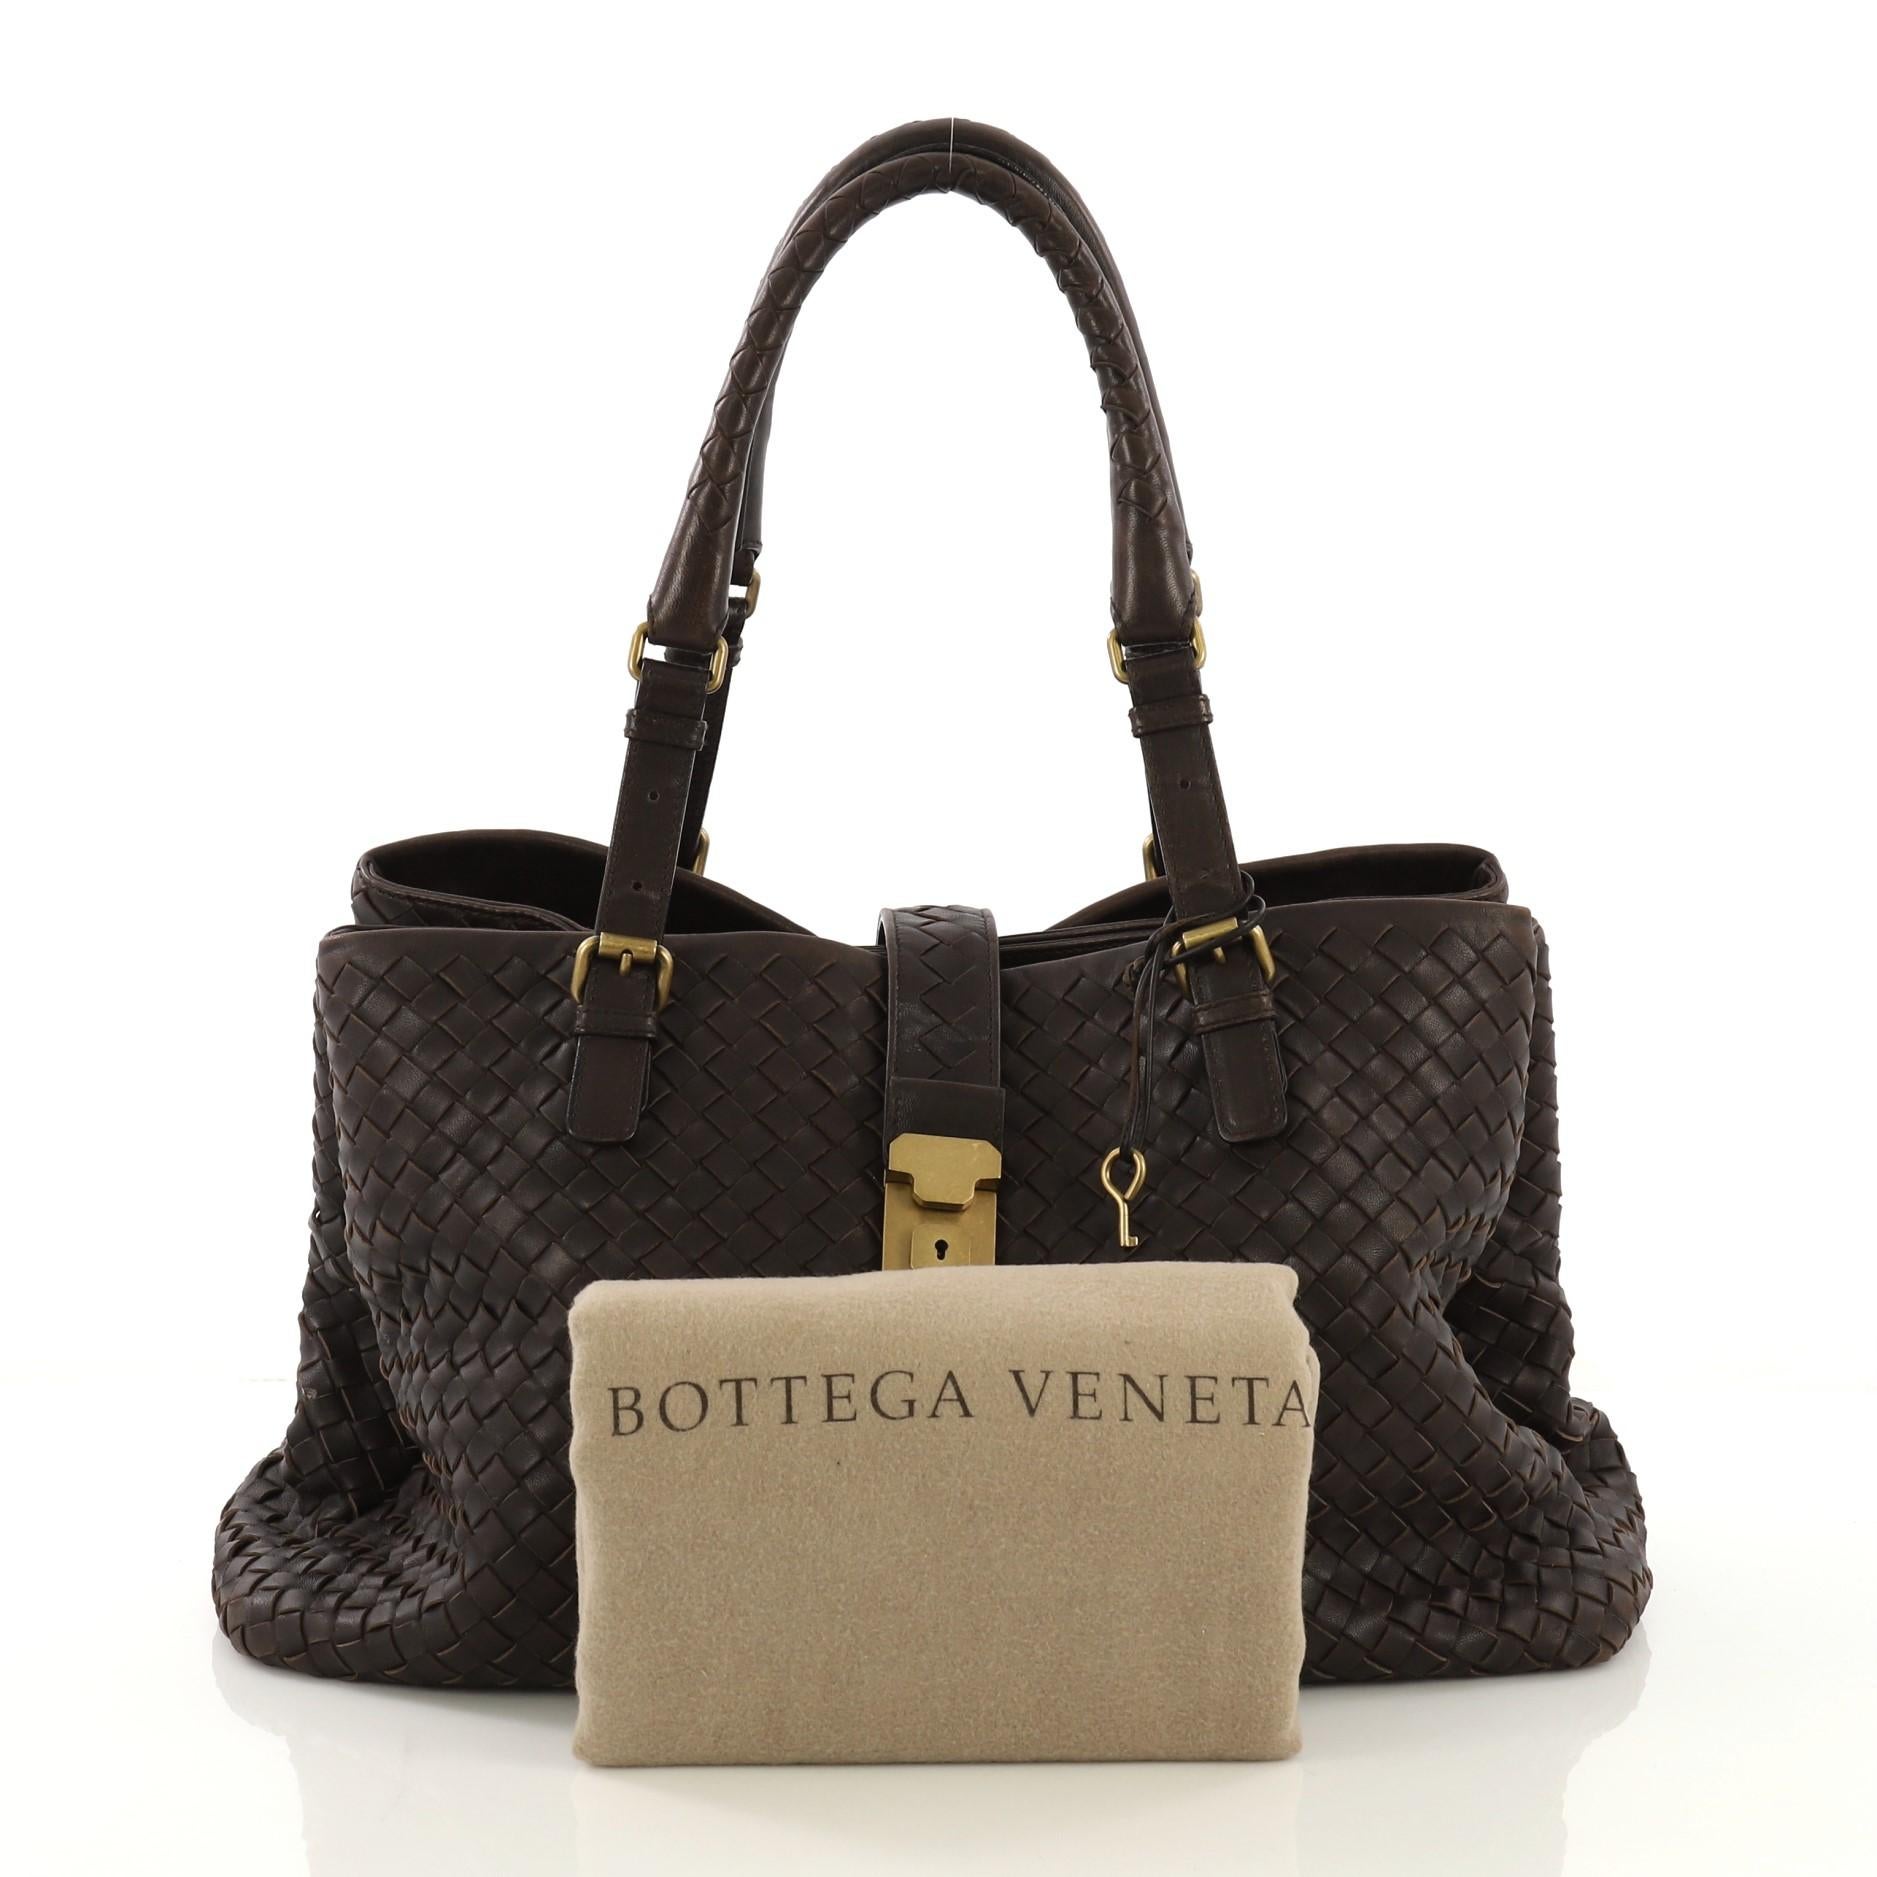 This Bottega Veneta Roma Handbag Intrecciato Nappa Medium, crafted in brown intrecciato nappa leather, features dual woven leather handles with buckle detailing, push lock tab opening and gold-tone hardware. It opens to beige suede interior divided